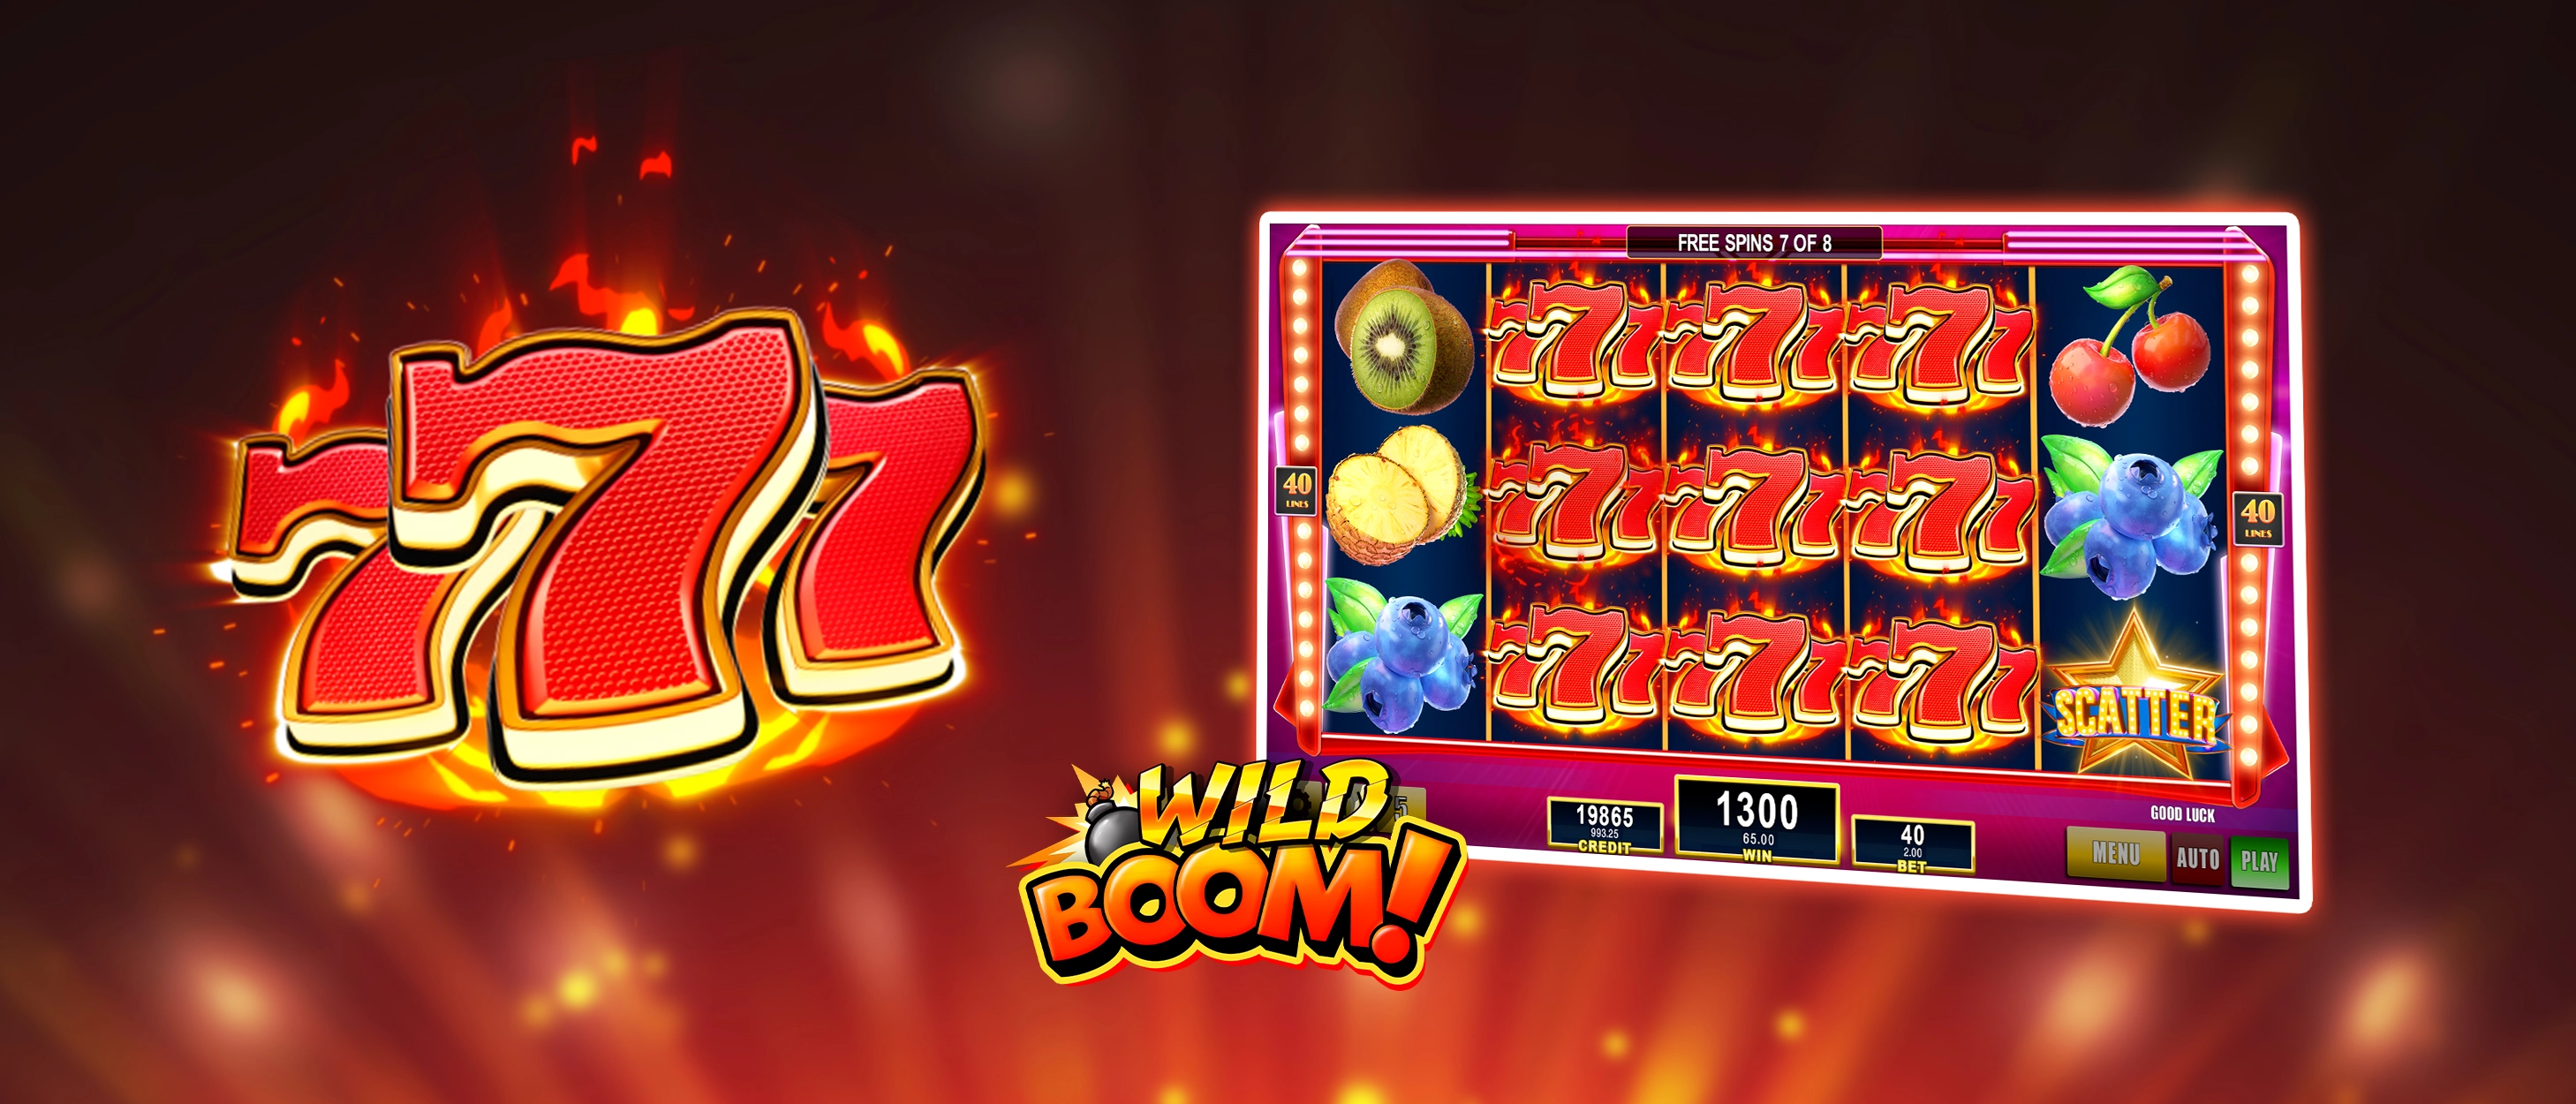 This image contains the wild symbol of the Wild Boom! game feature and the game screen of the Fight the Fire game with the Wild Boom! game feature active simulating a big casino win.